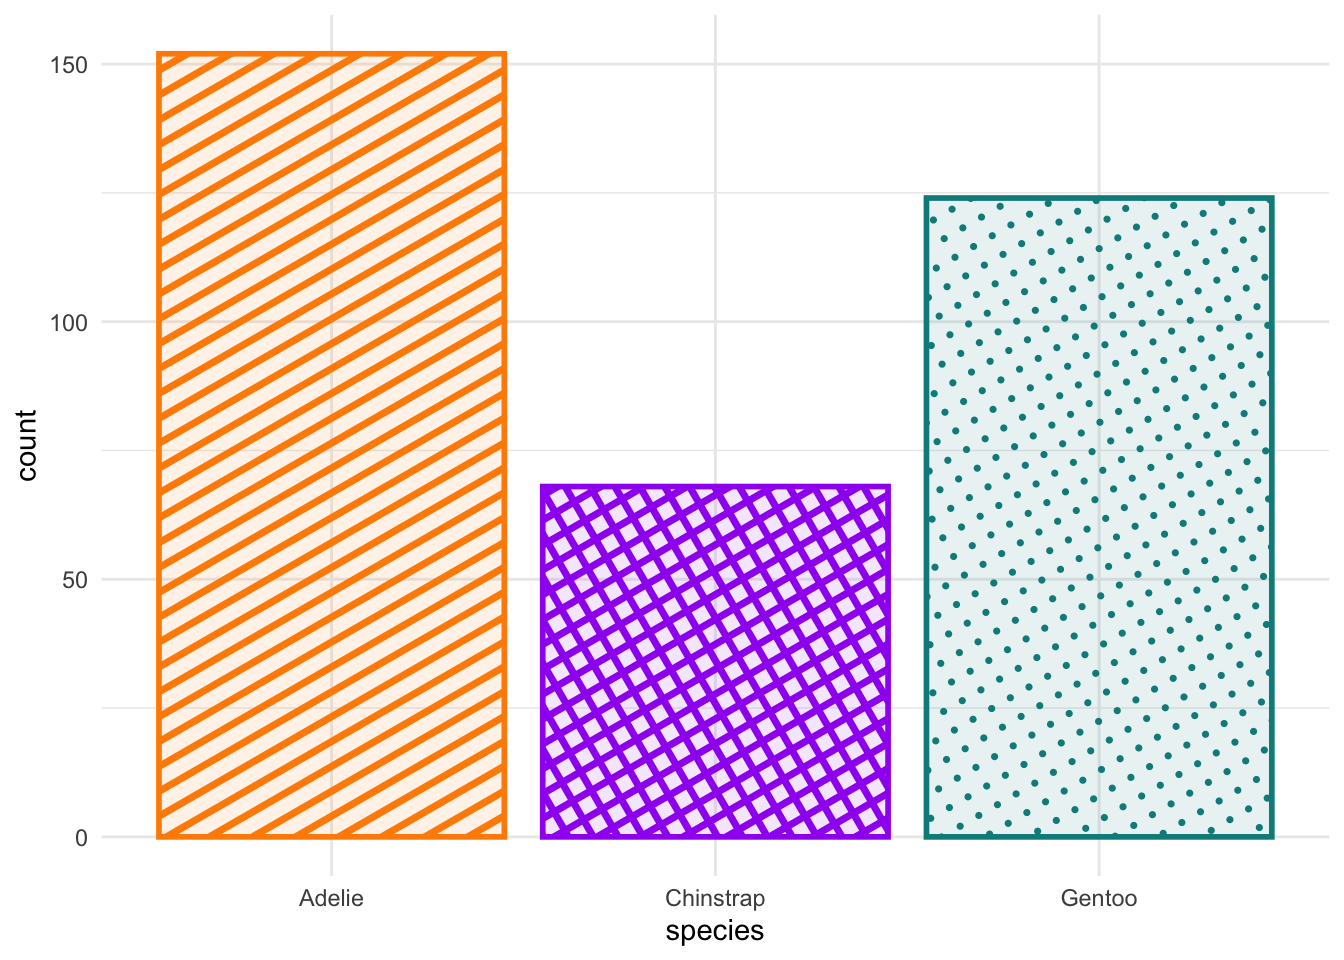 Bar chart showing 3 penguin species along the x axis and the number of observations on the y axis. The bar for the Adelie species uses the color orange and diagonal stripes, the bar for Chinstrap species uses the color purple and crosshatches, and the bar for the Gentoo species uses the color cyan and a dotted pattern.